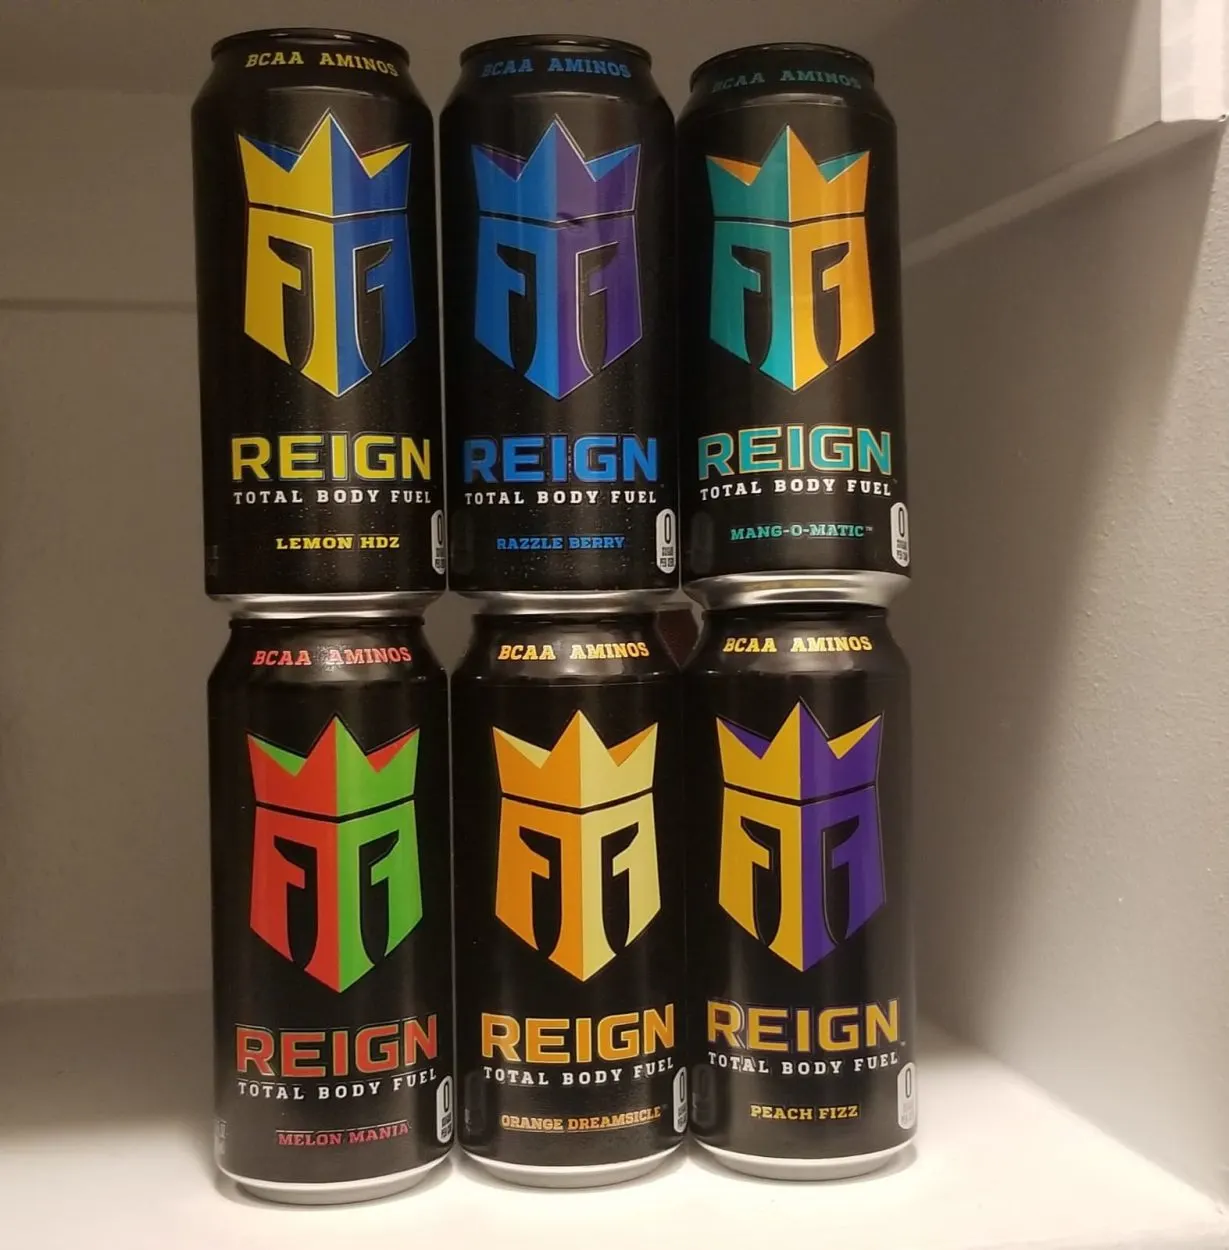 Six cans of Reign energy drink